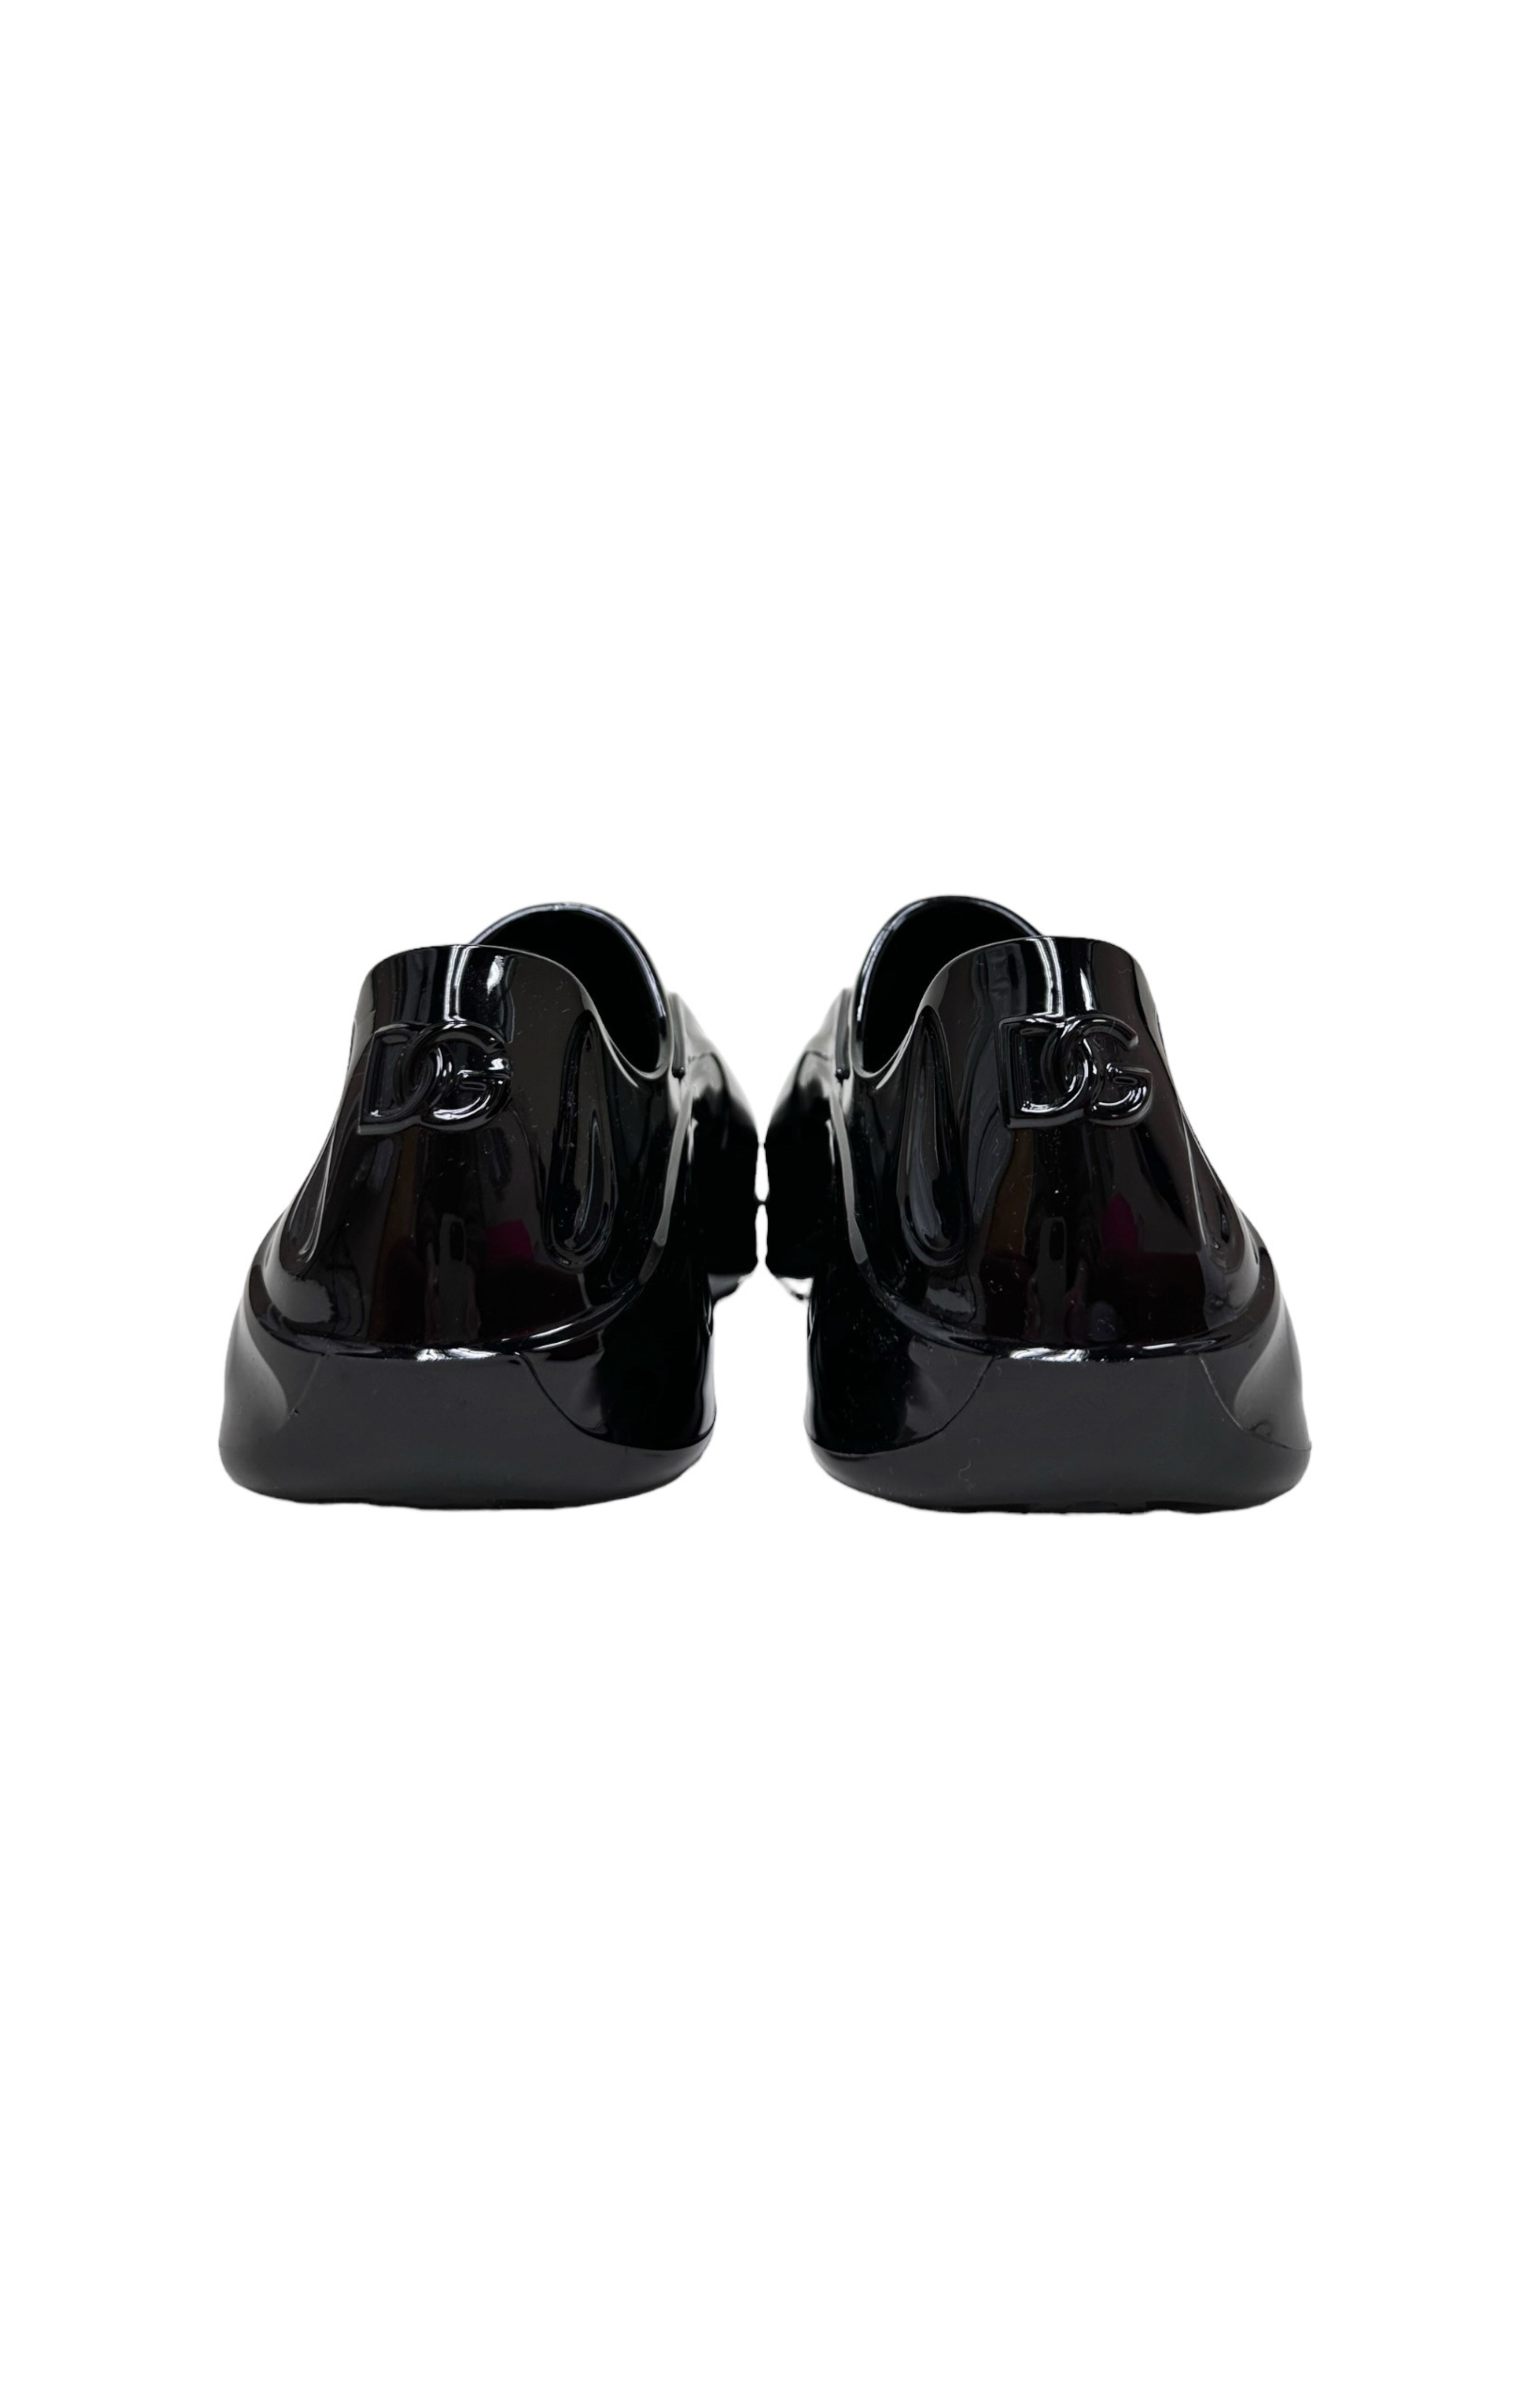 DOLCE & GABBANA (NEW) Shoes Size: EUR 36 / Fit like US 6